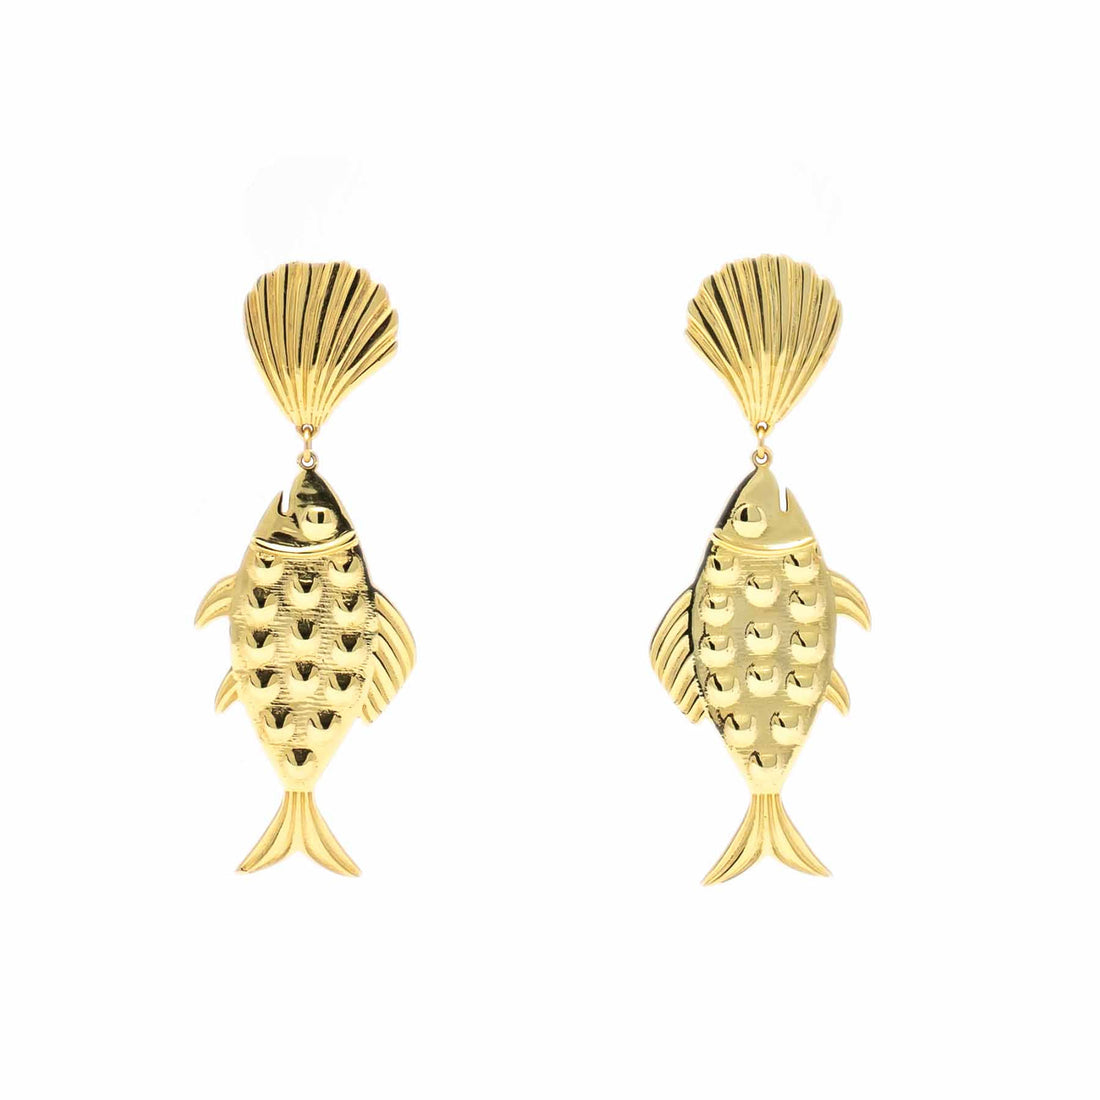 THE GOLD FISH EARRING